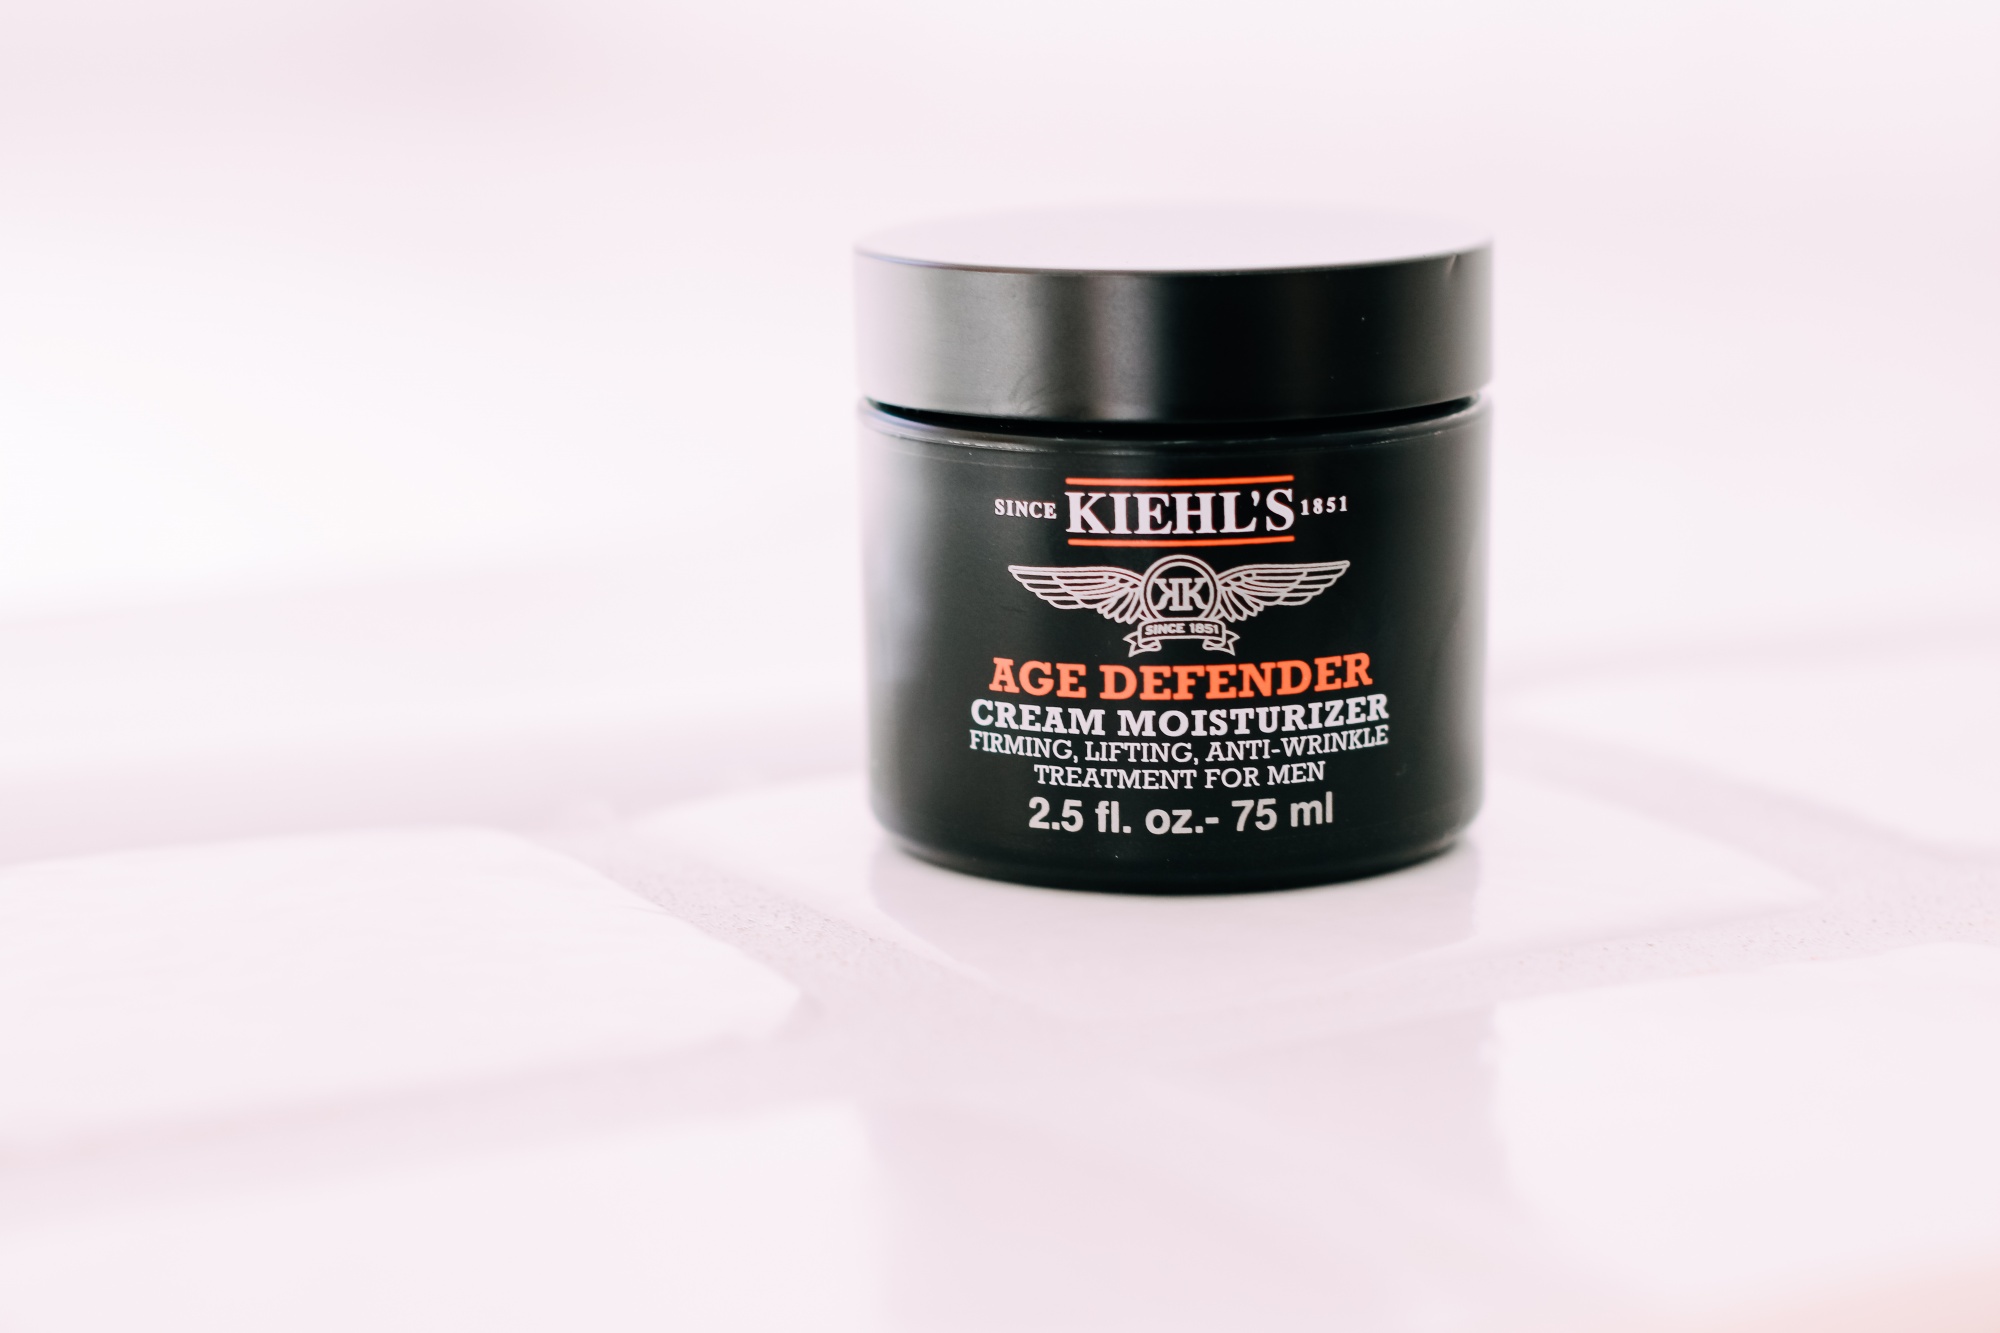 Skincare Gifts, Erin Busbee of Busbee Style sharing skincare for men including the Age Defender Cream Moisturizer by Kiehl's